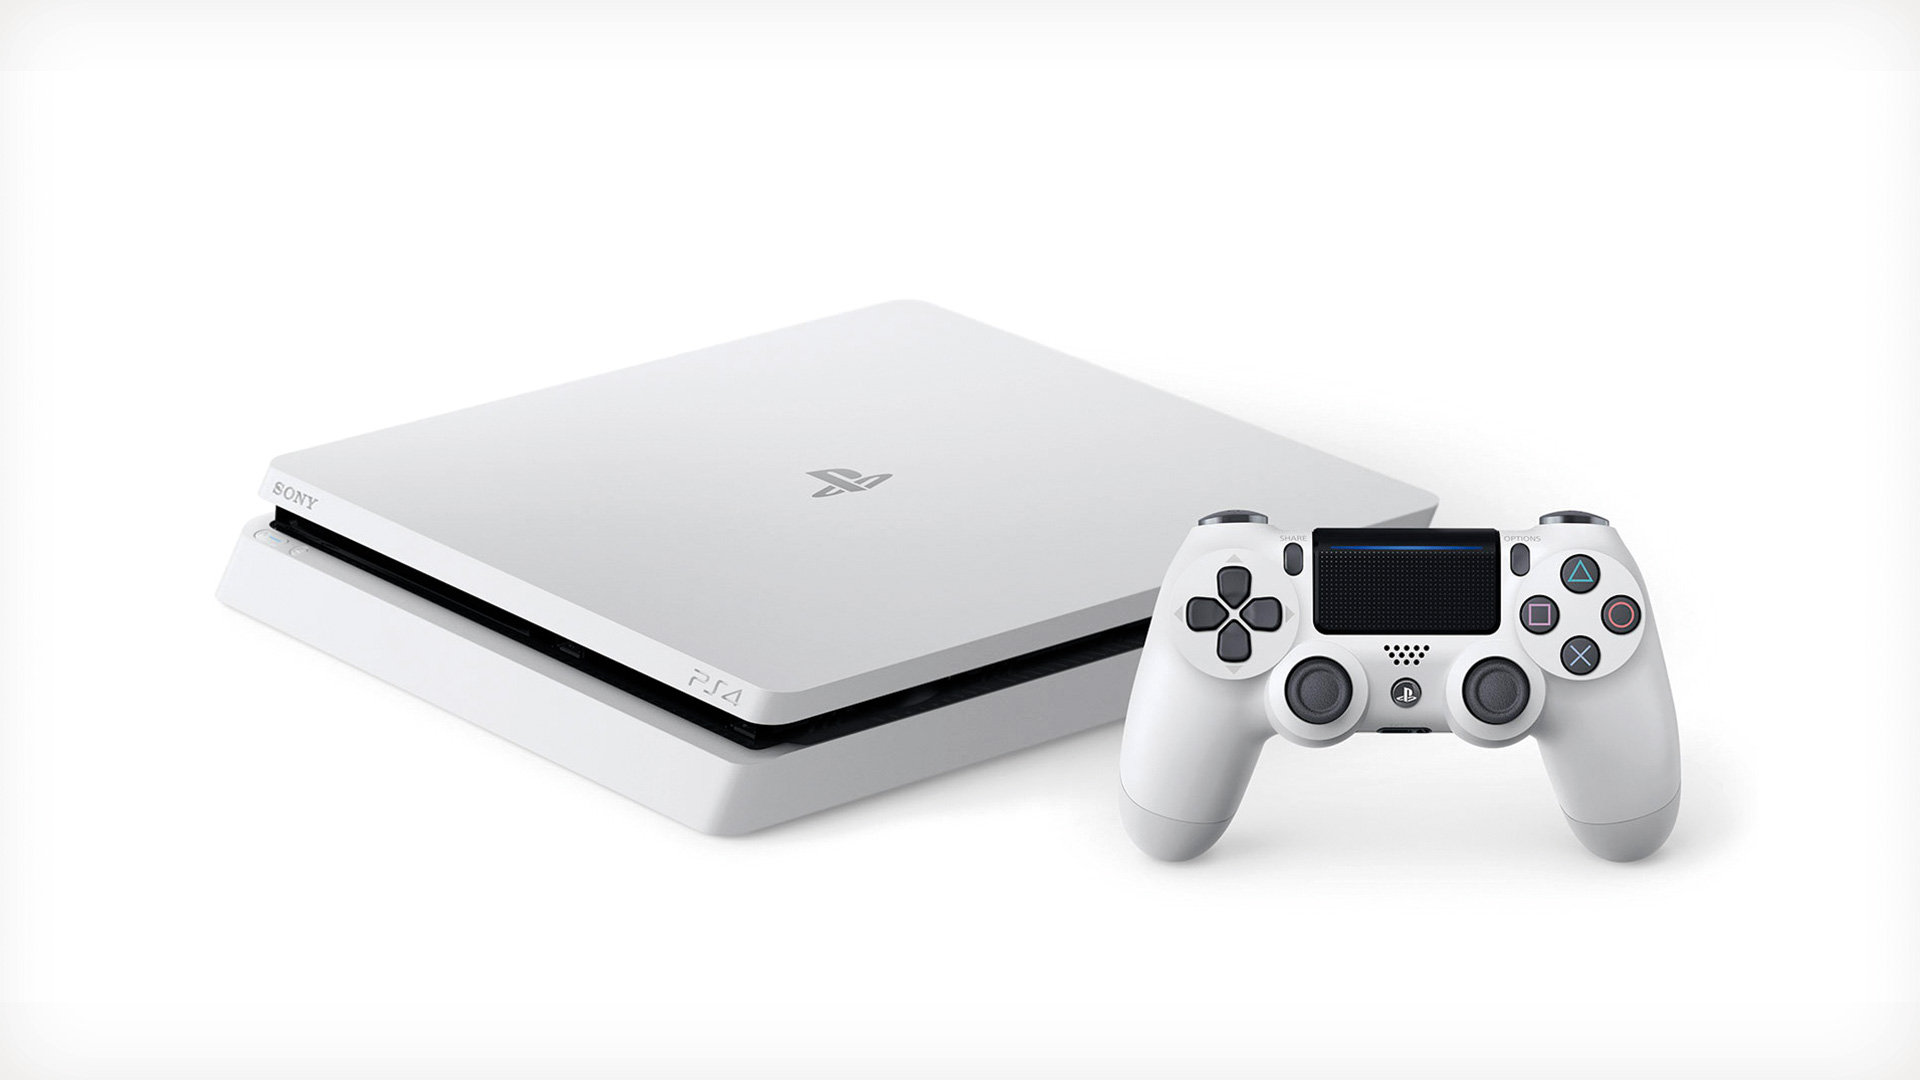 Sony has released a new PS4 system software update